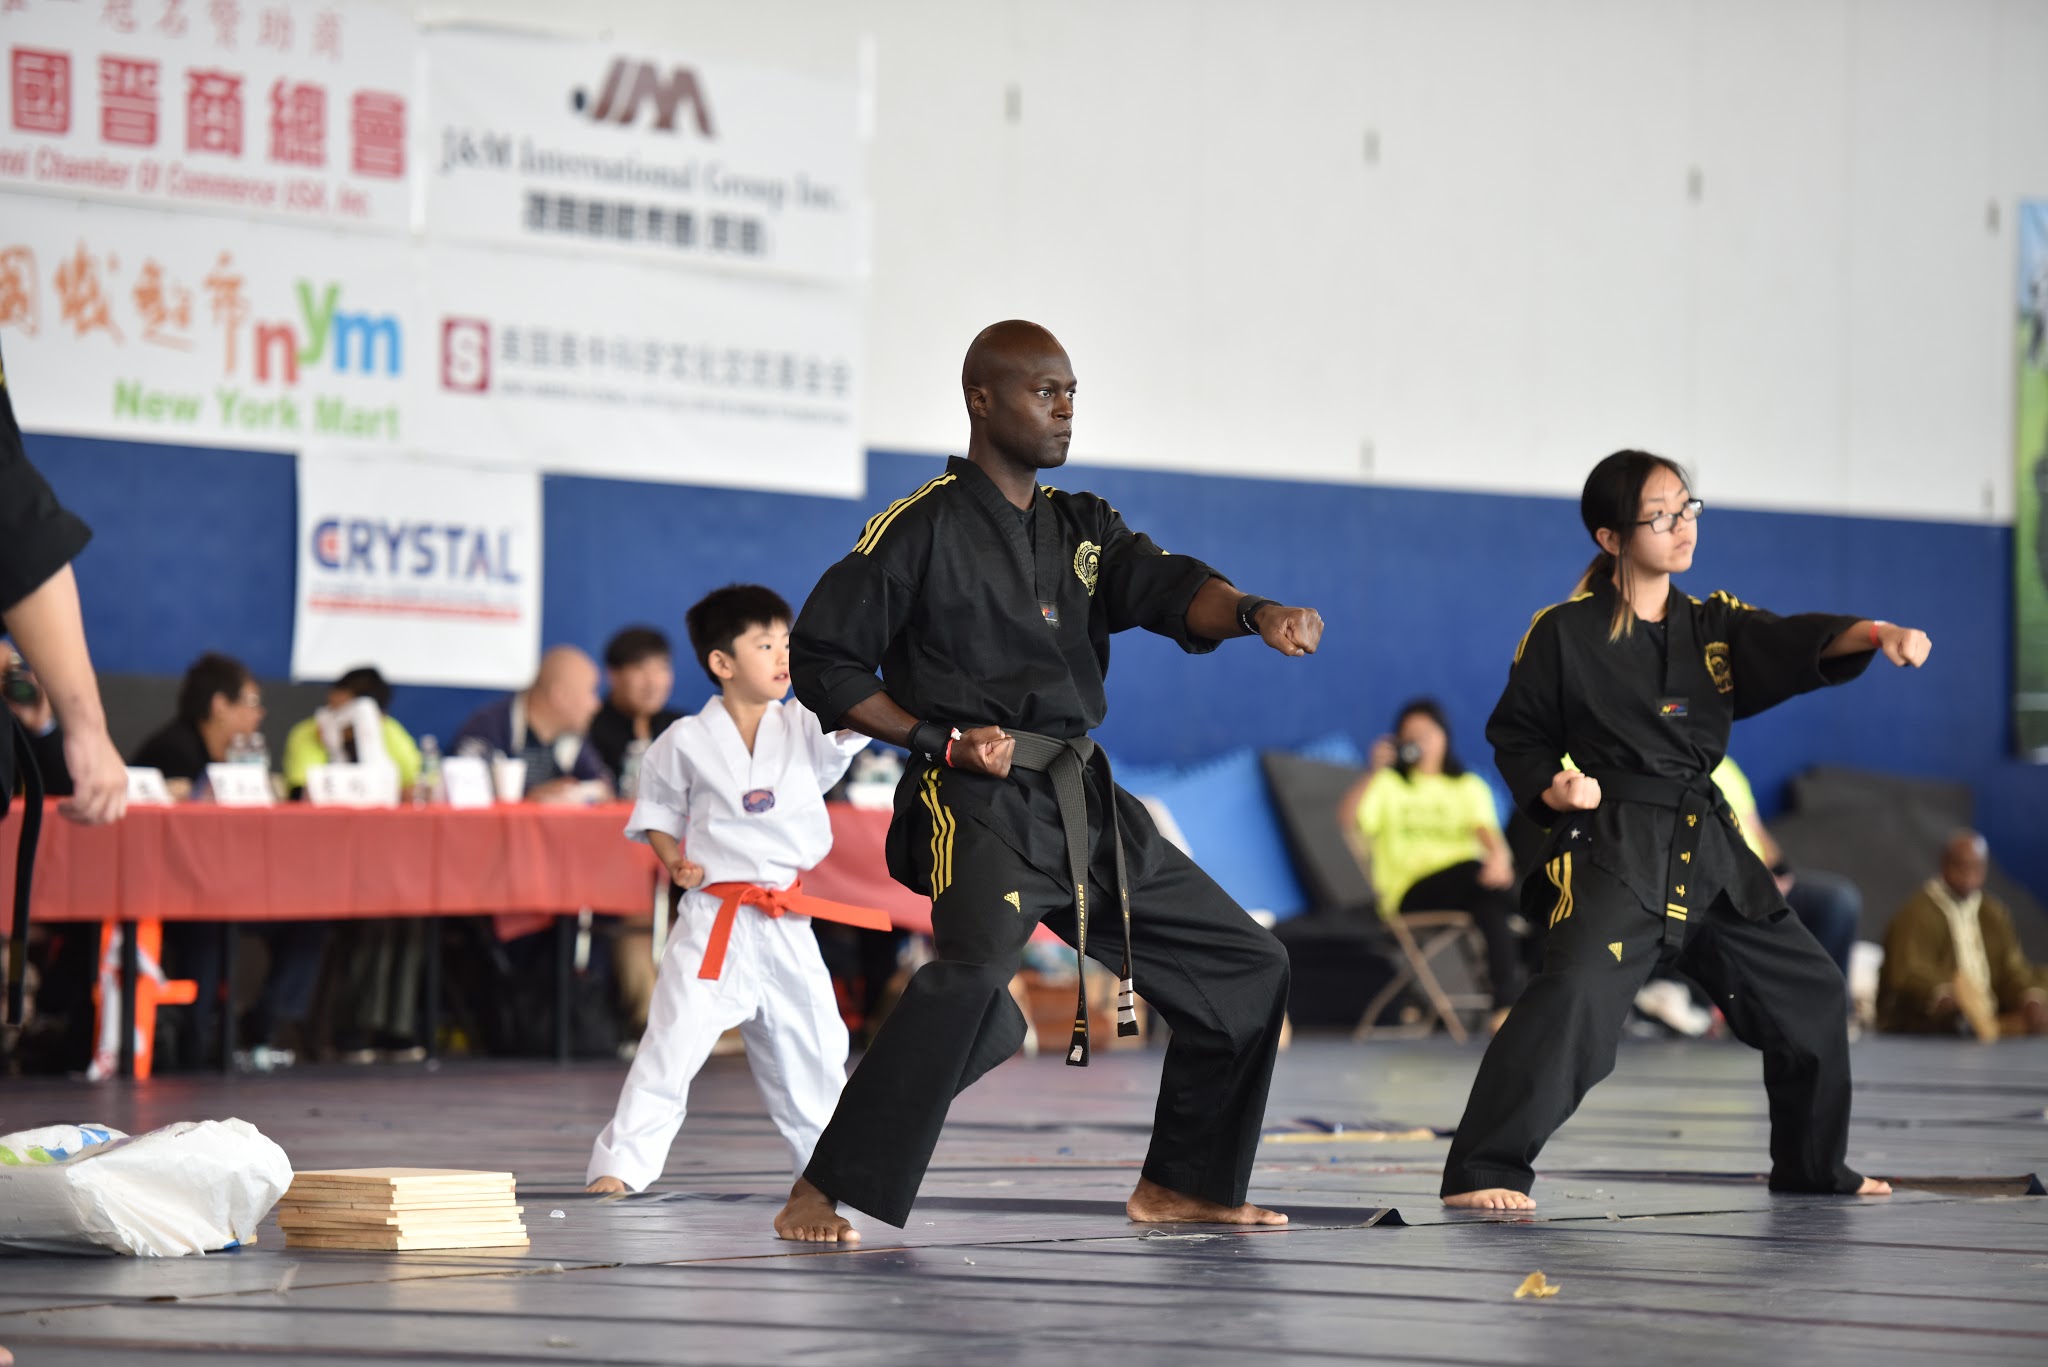 Competition 2015 photos at the US Open Martial Arts Championship organized by the WFMAF.